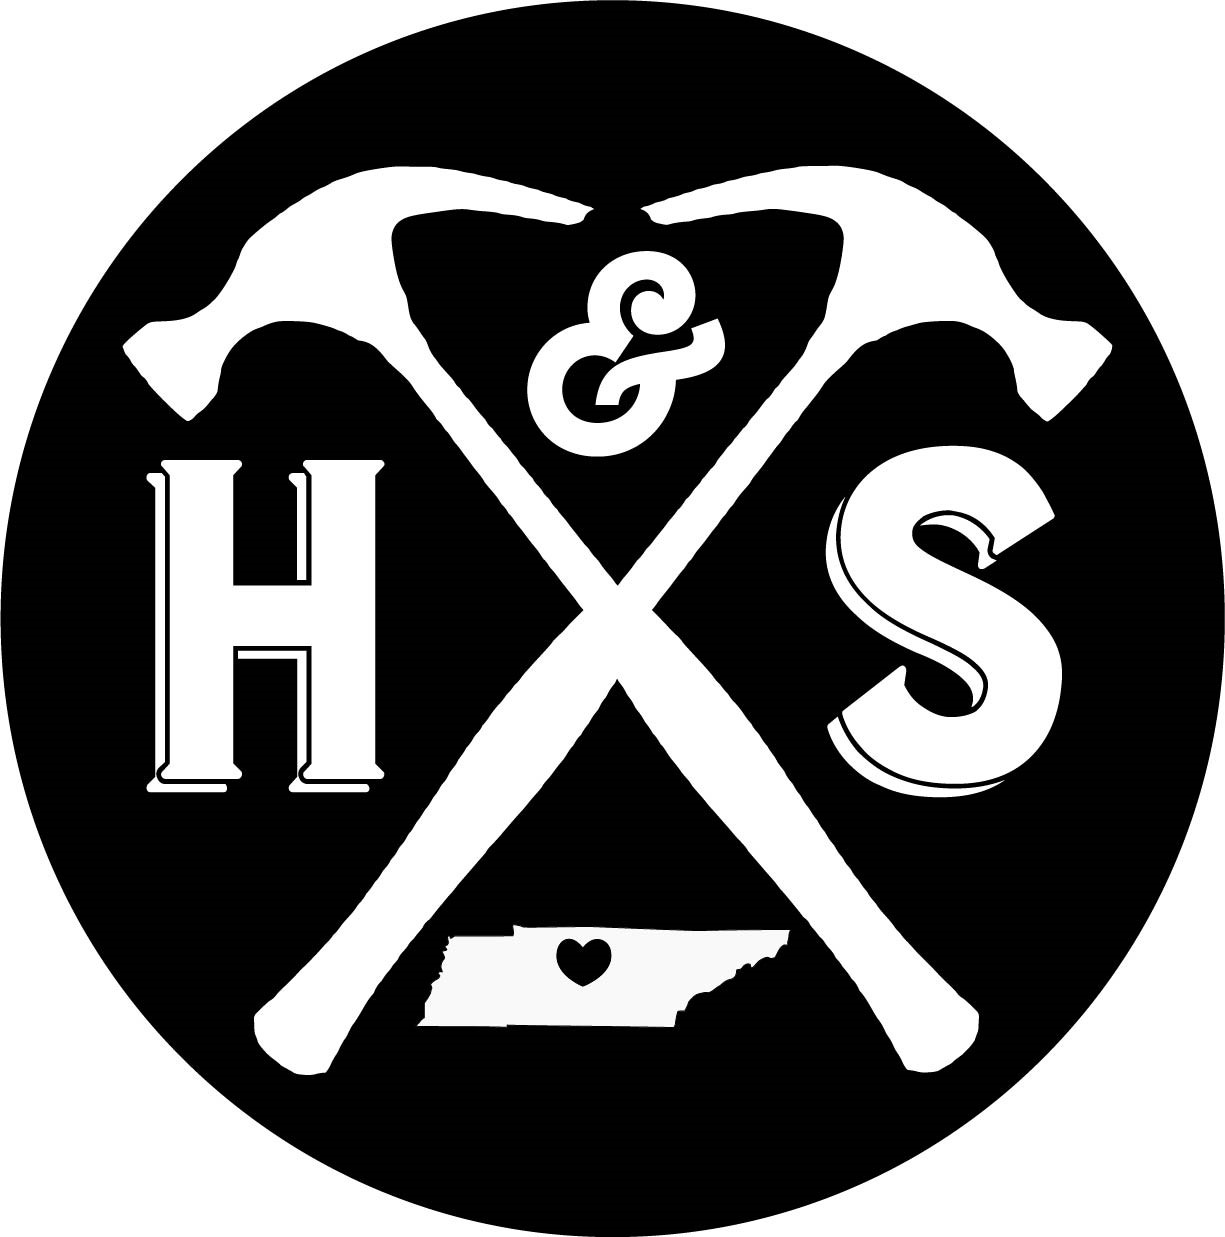 Hammer and Stain logo